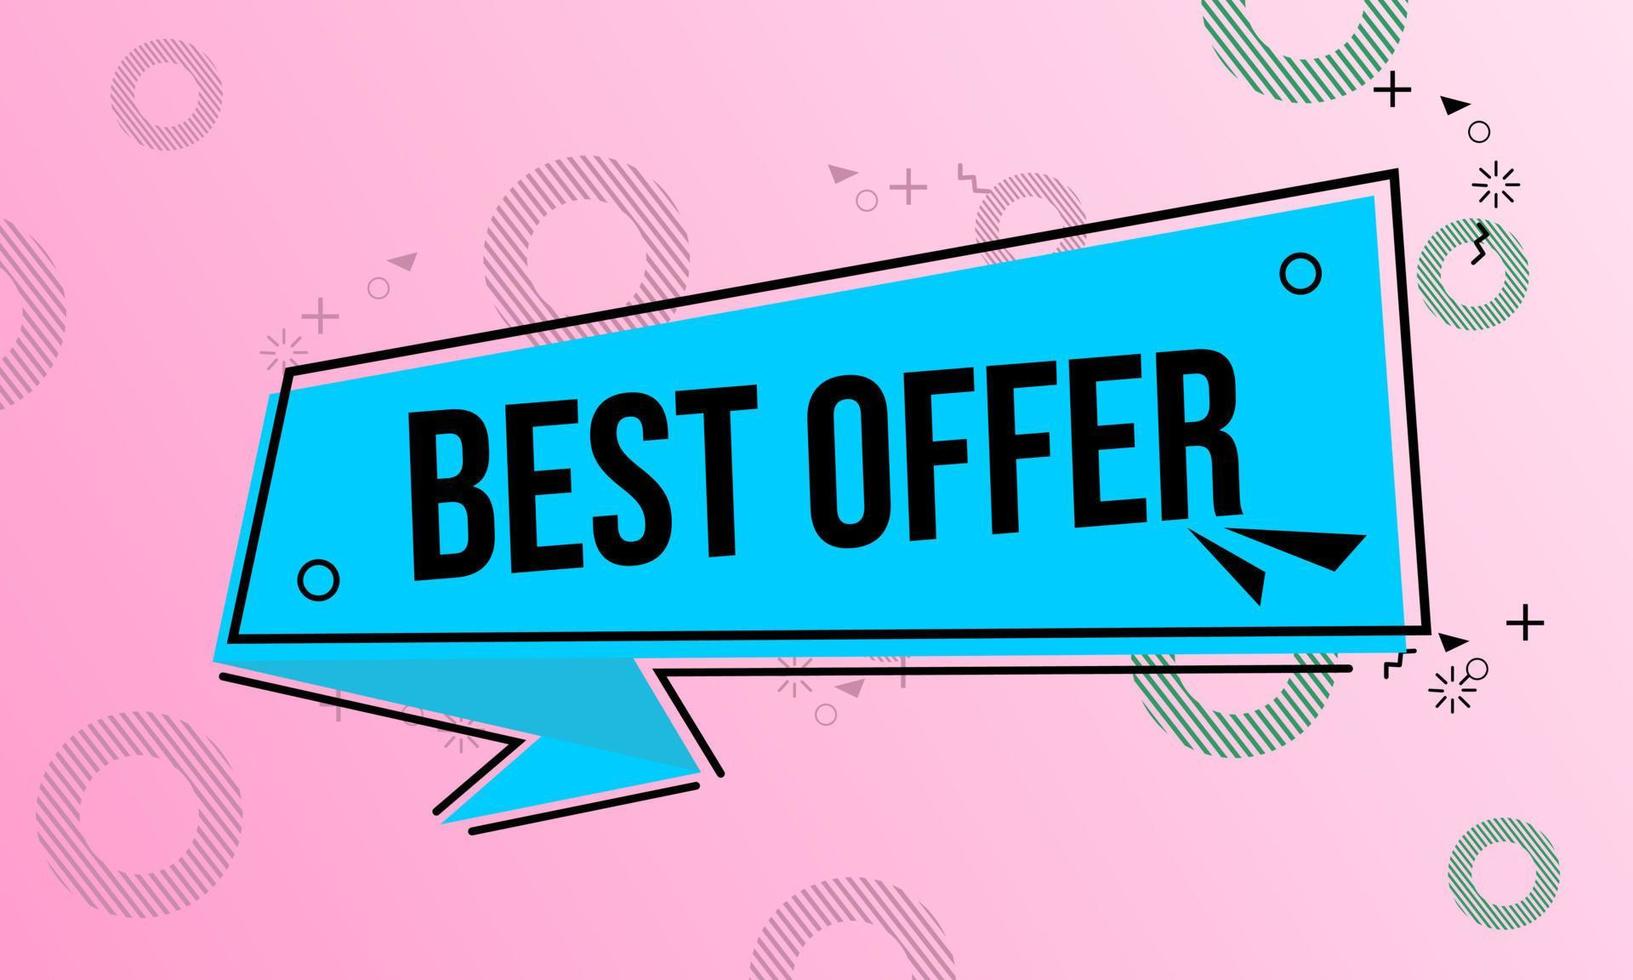 sale banner illustration with best offer text. design on a blue background with geometric ornaments vector